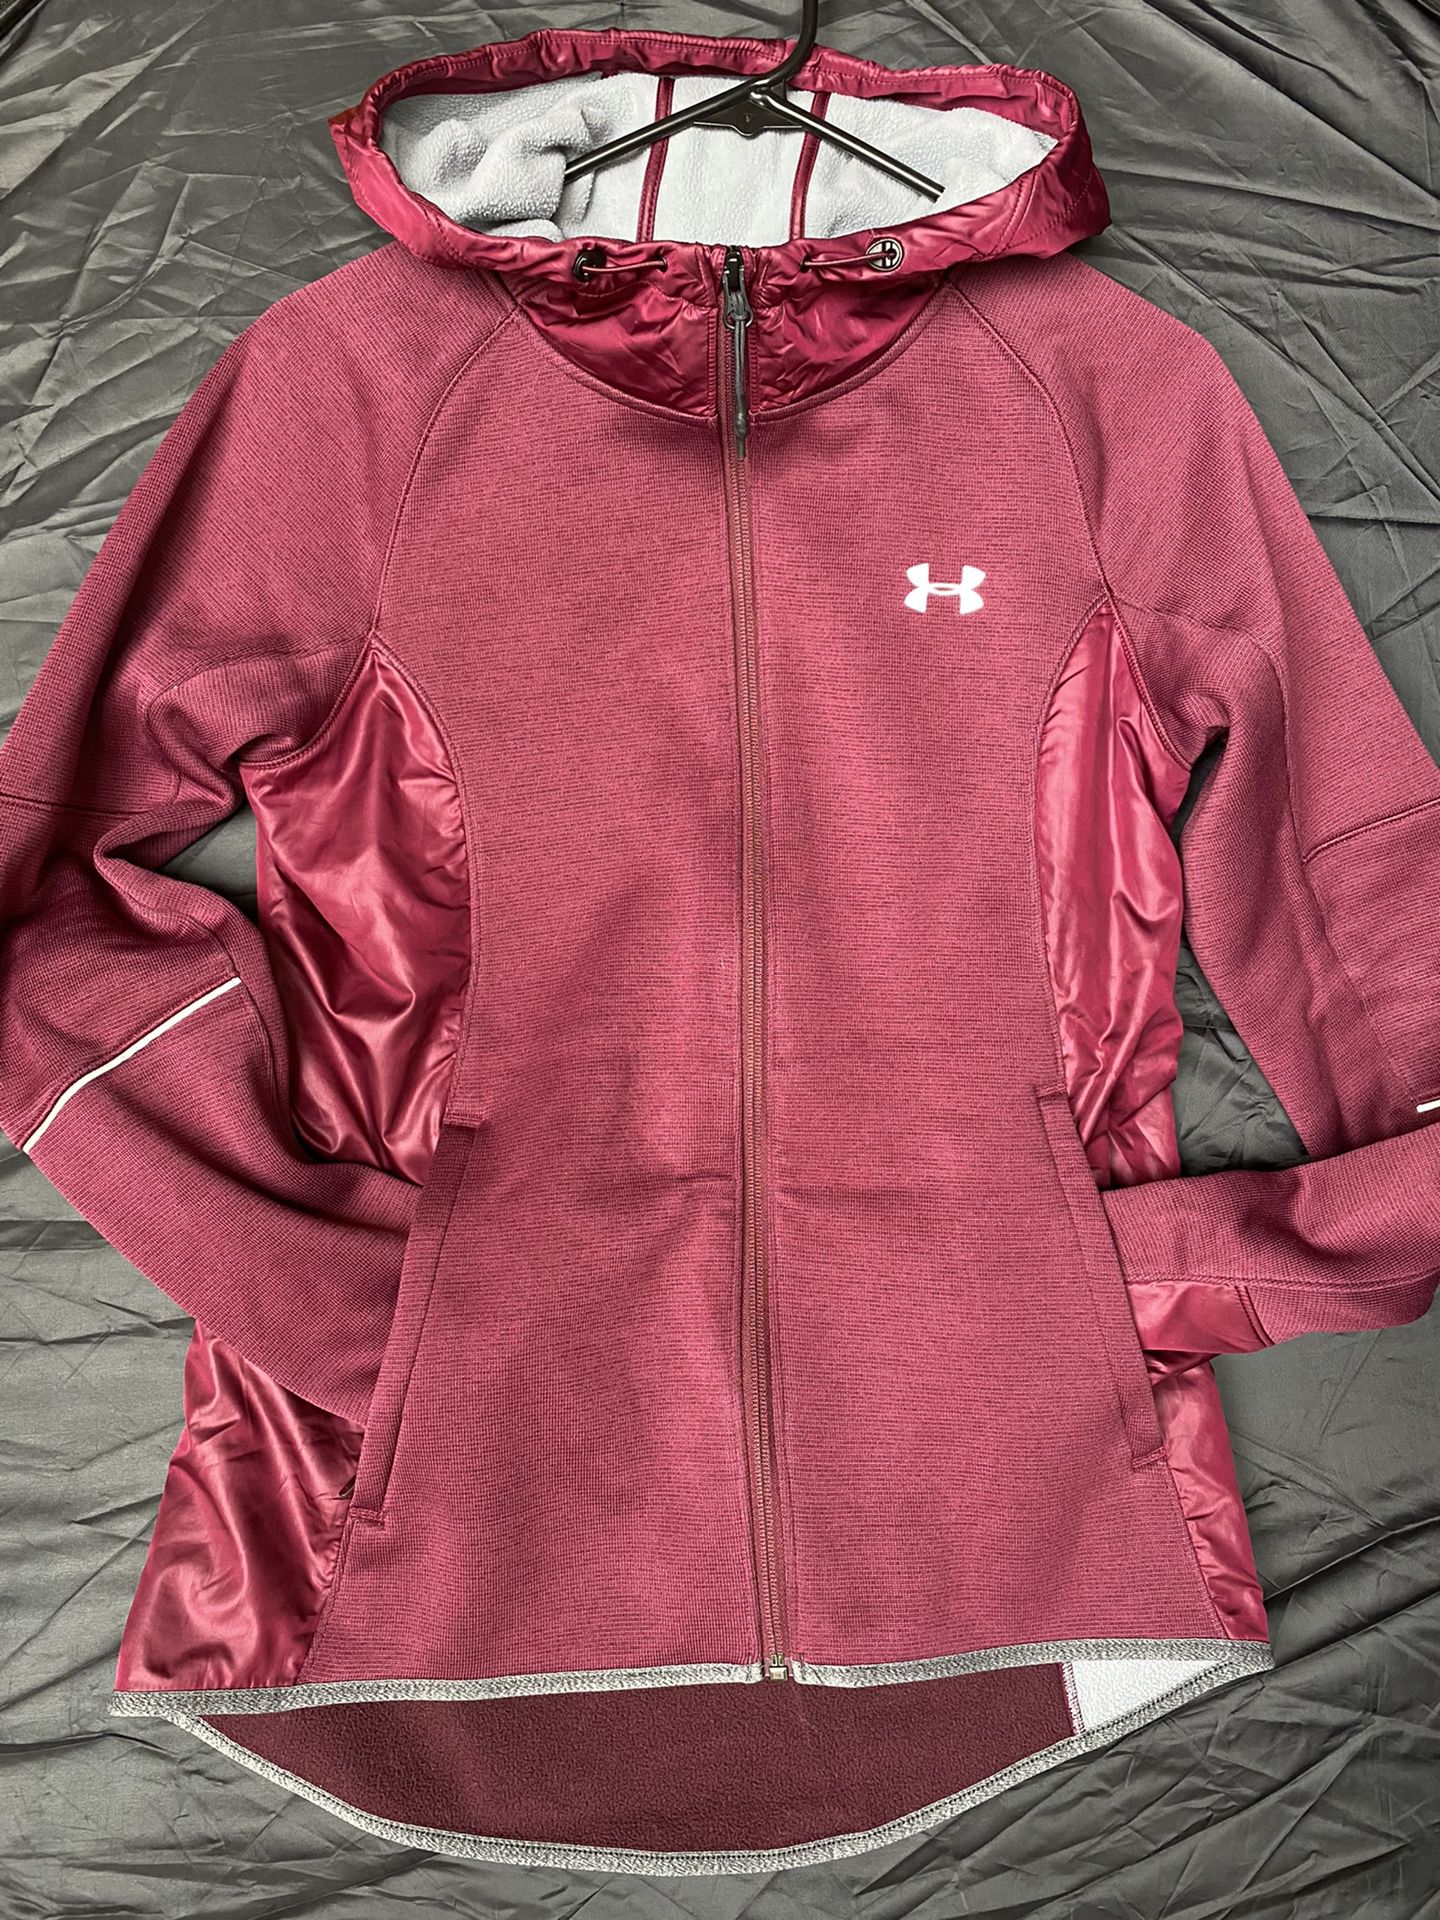 Under Armour cold gear